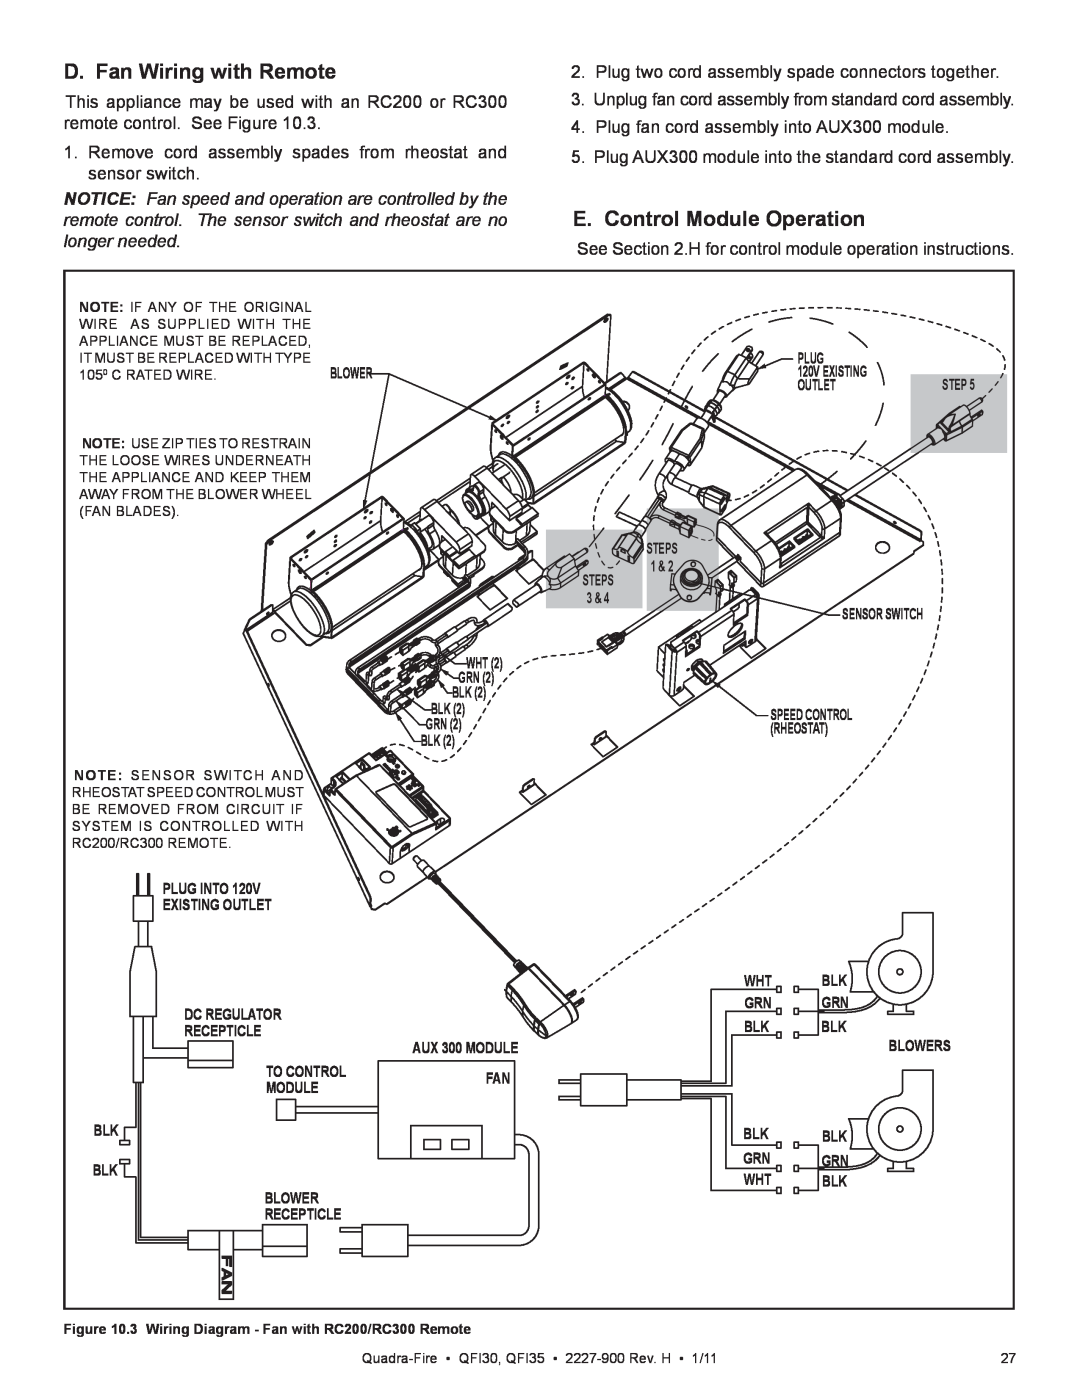 Quadra-Fire QF130 owner manual D. Fan Wiring with Remote, E.Control Module Operation 